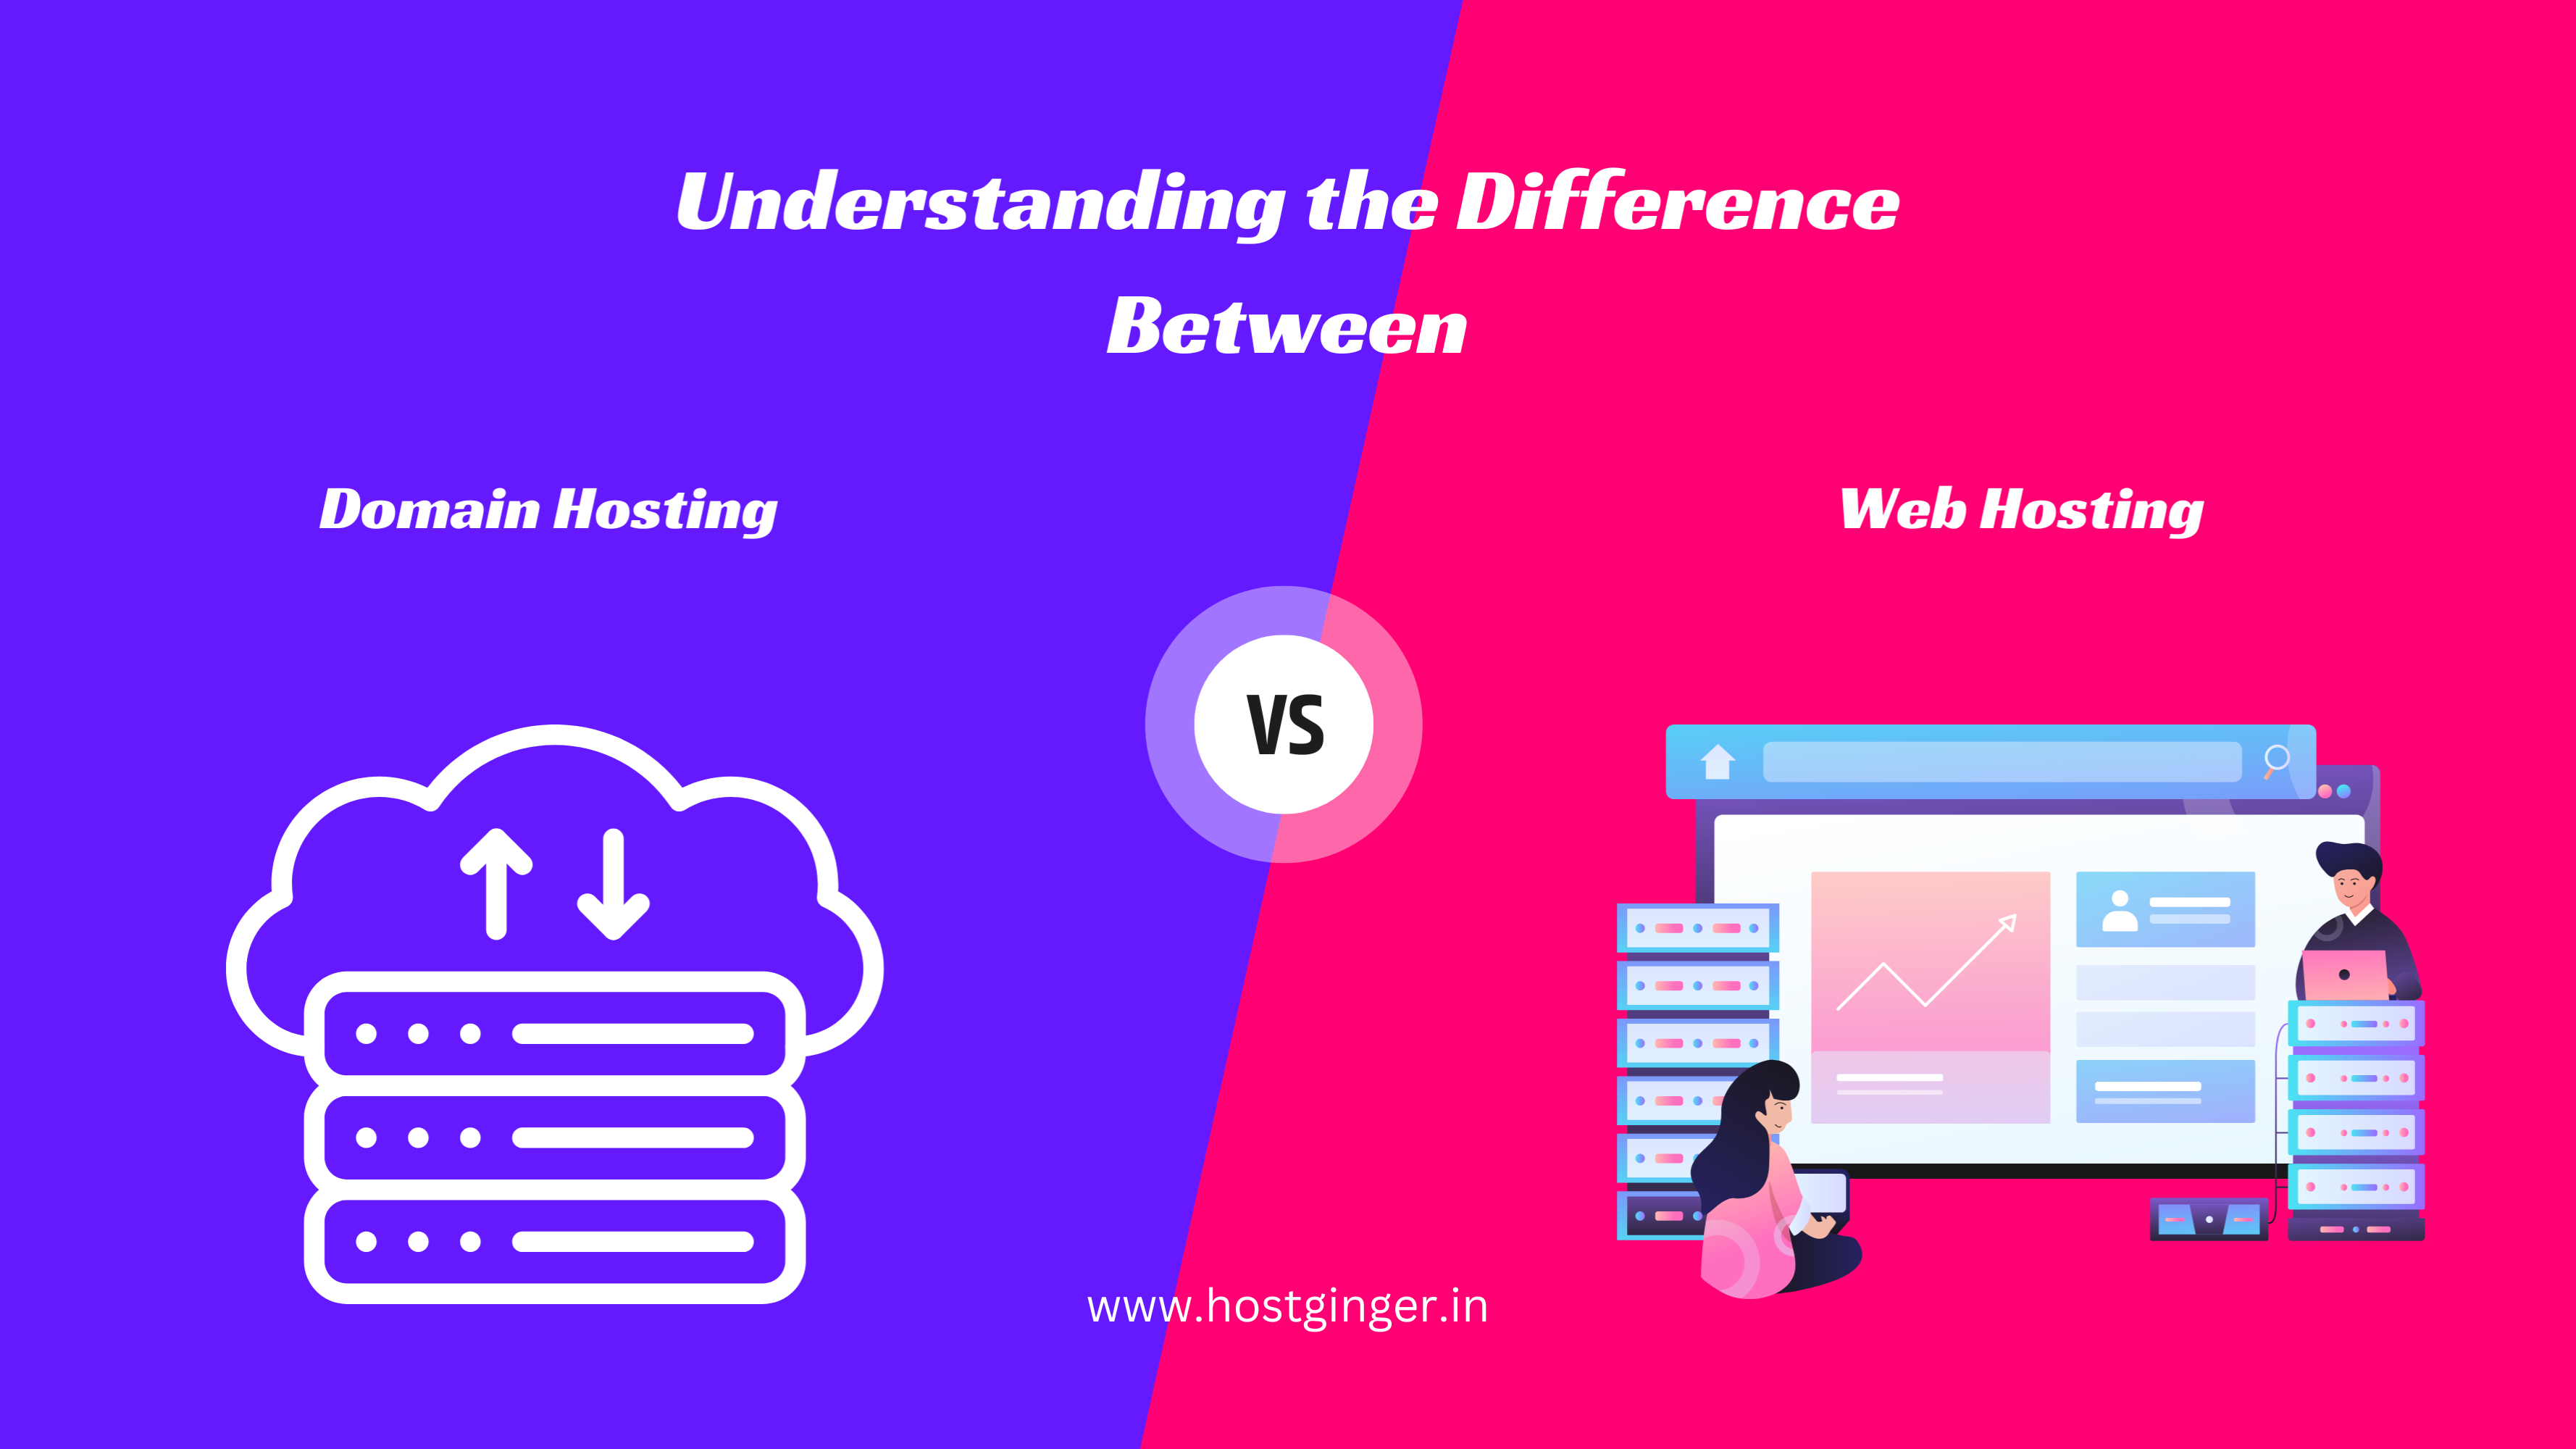 Difference Between Domain Hosting and Web Hosting